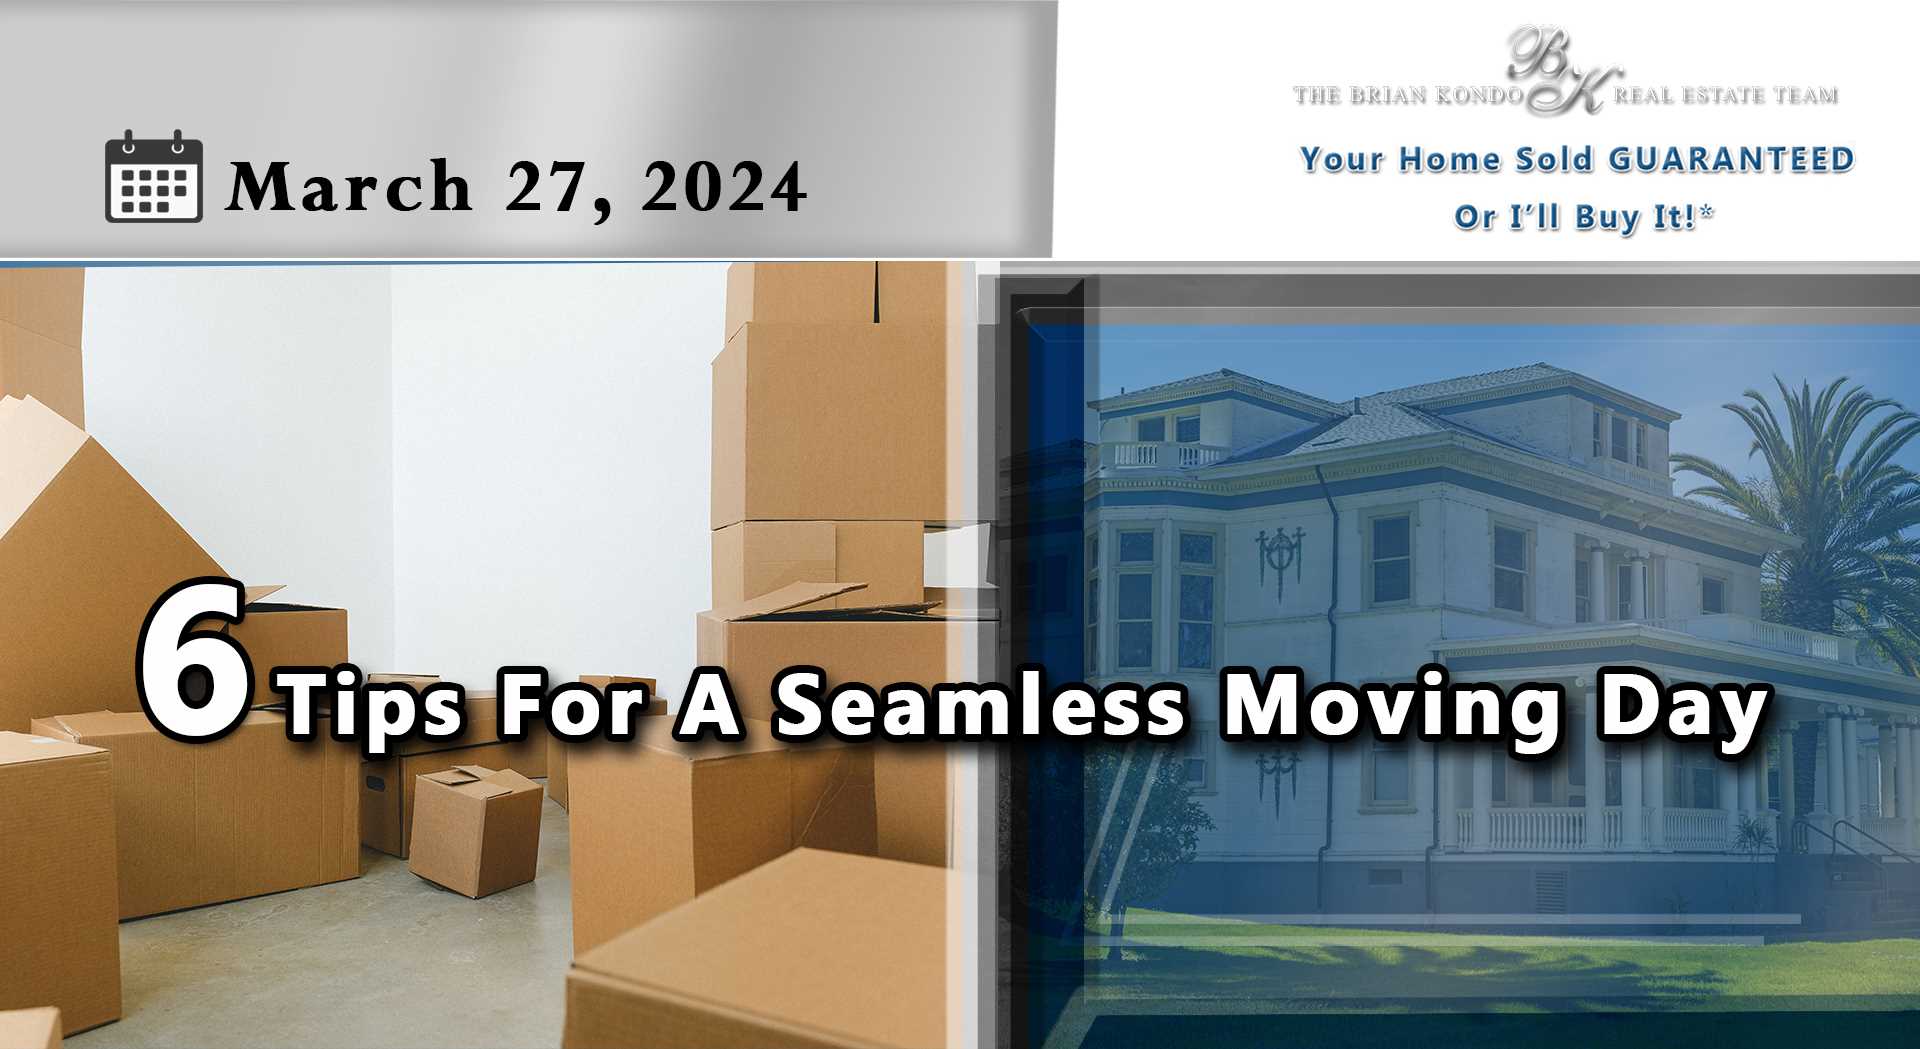  6 Tips For A Seamless Moving Day